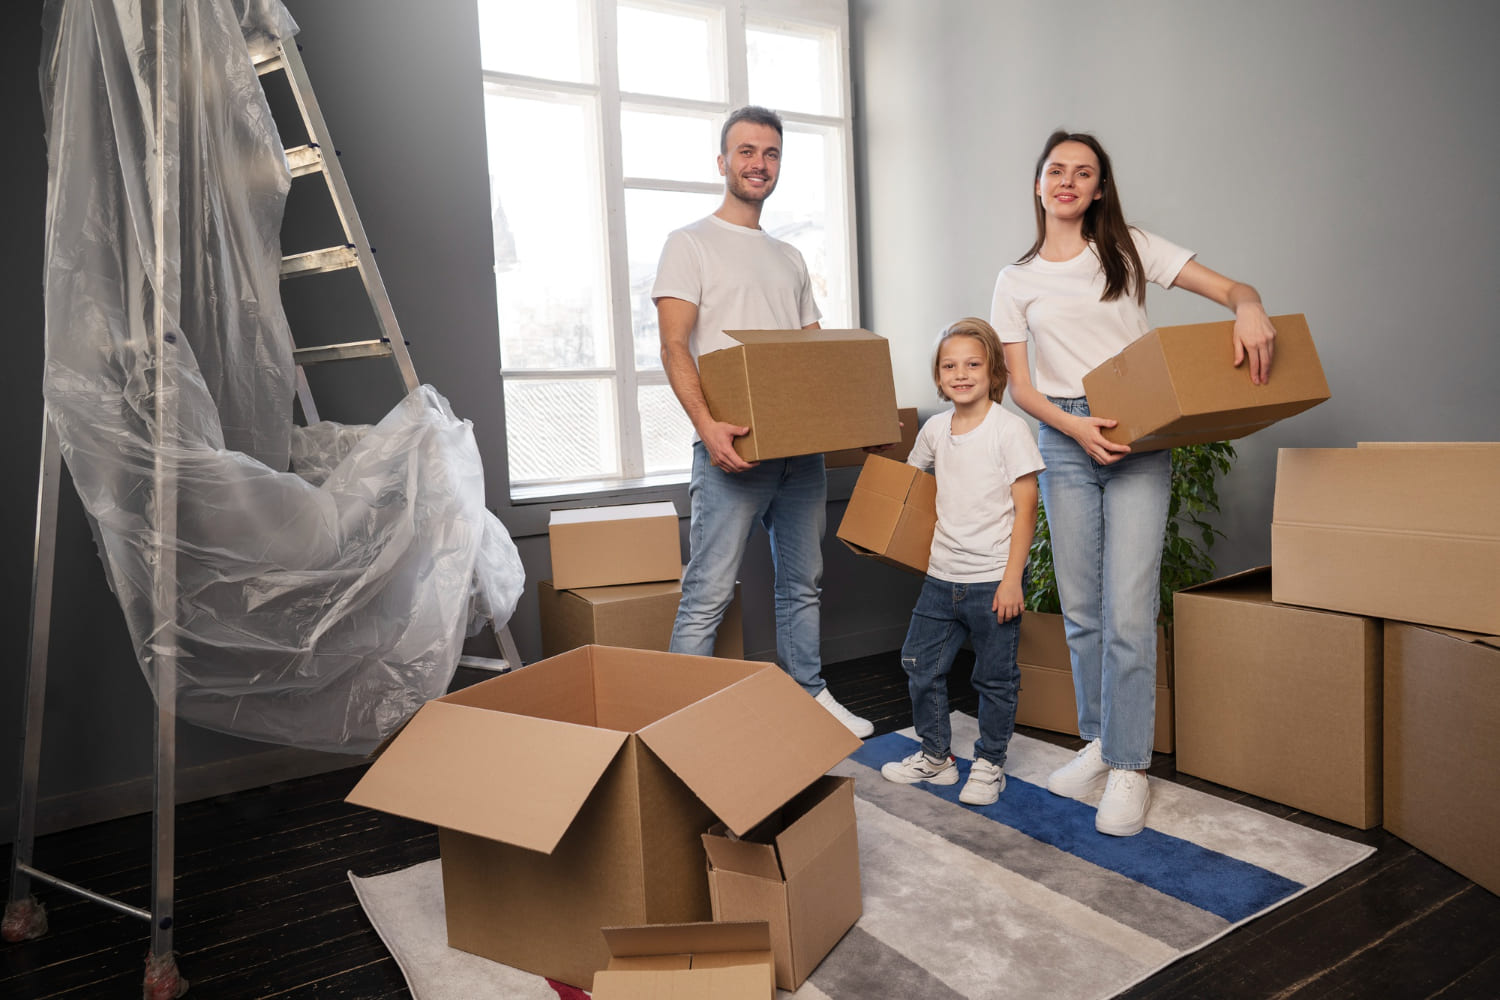 COURIER FOR SMALL REMOVALS: CAN THEY BE TRUSTED?